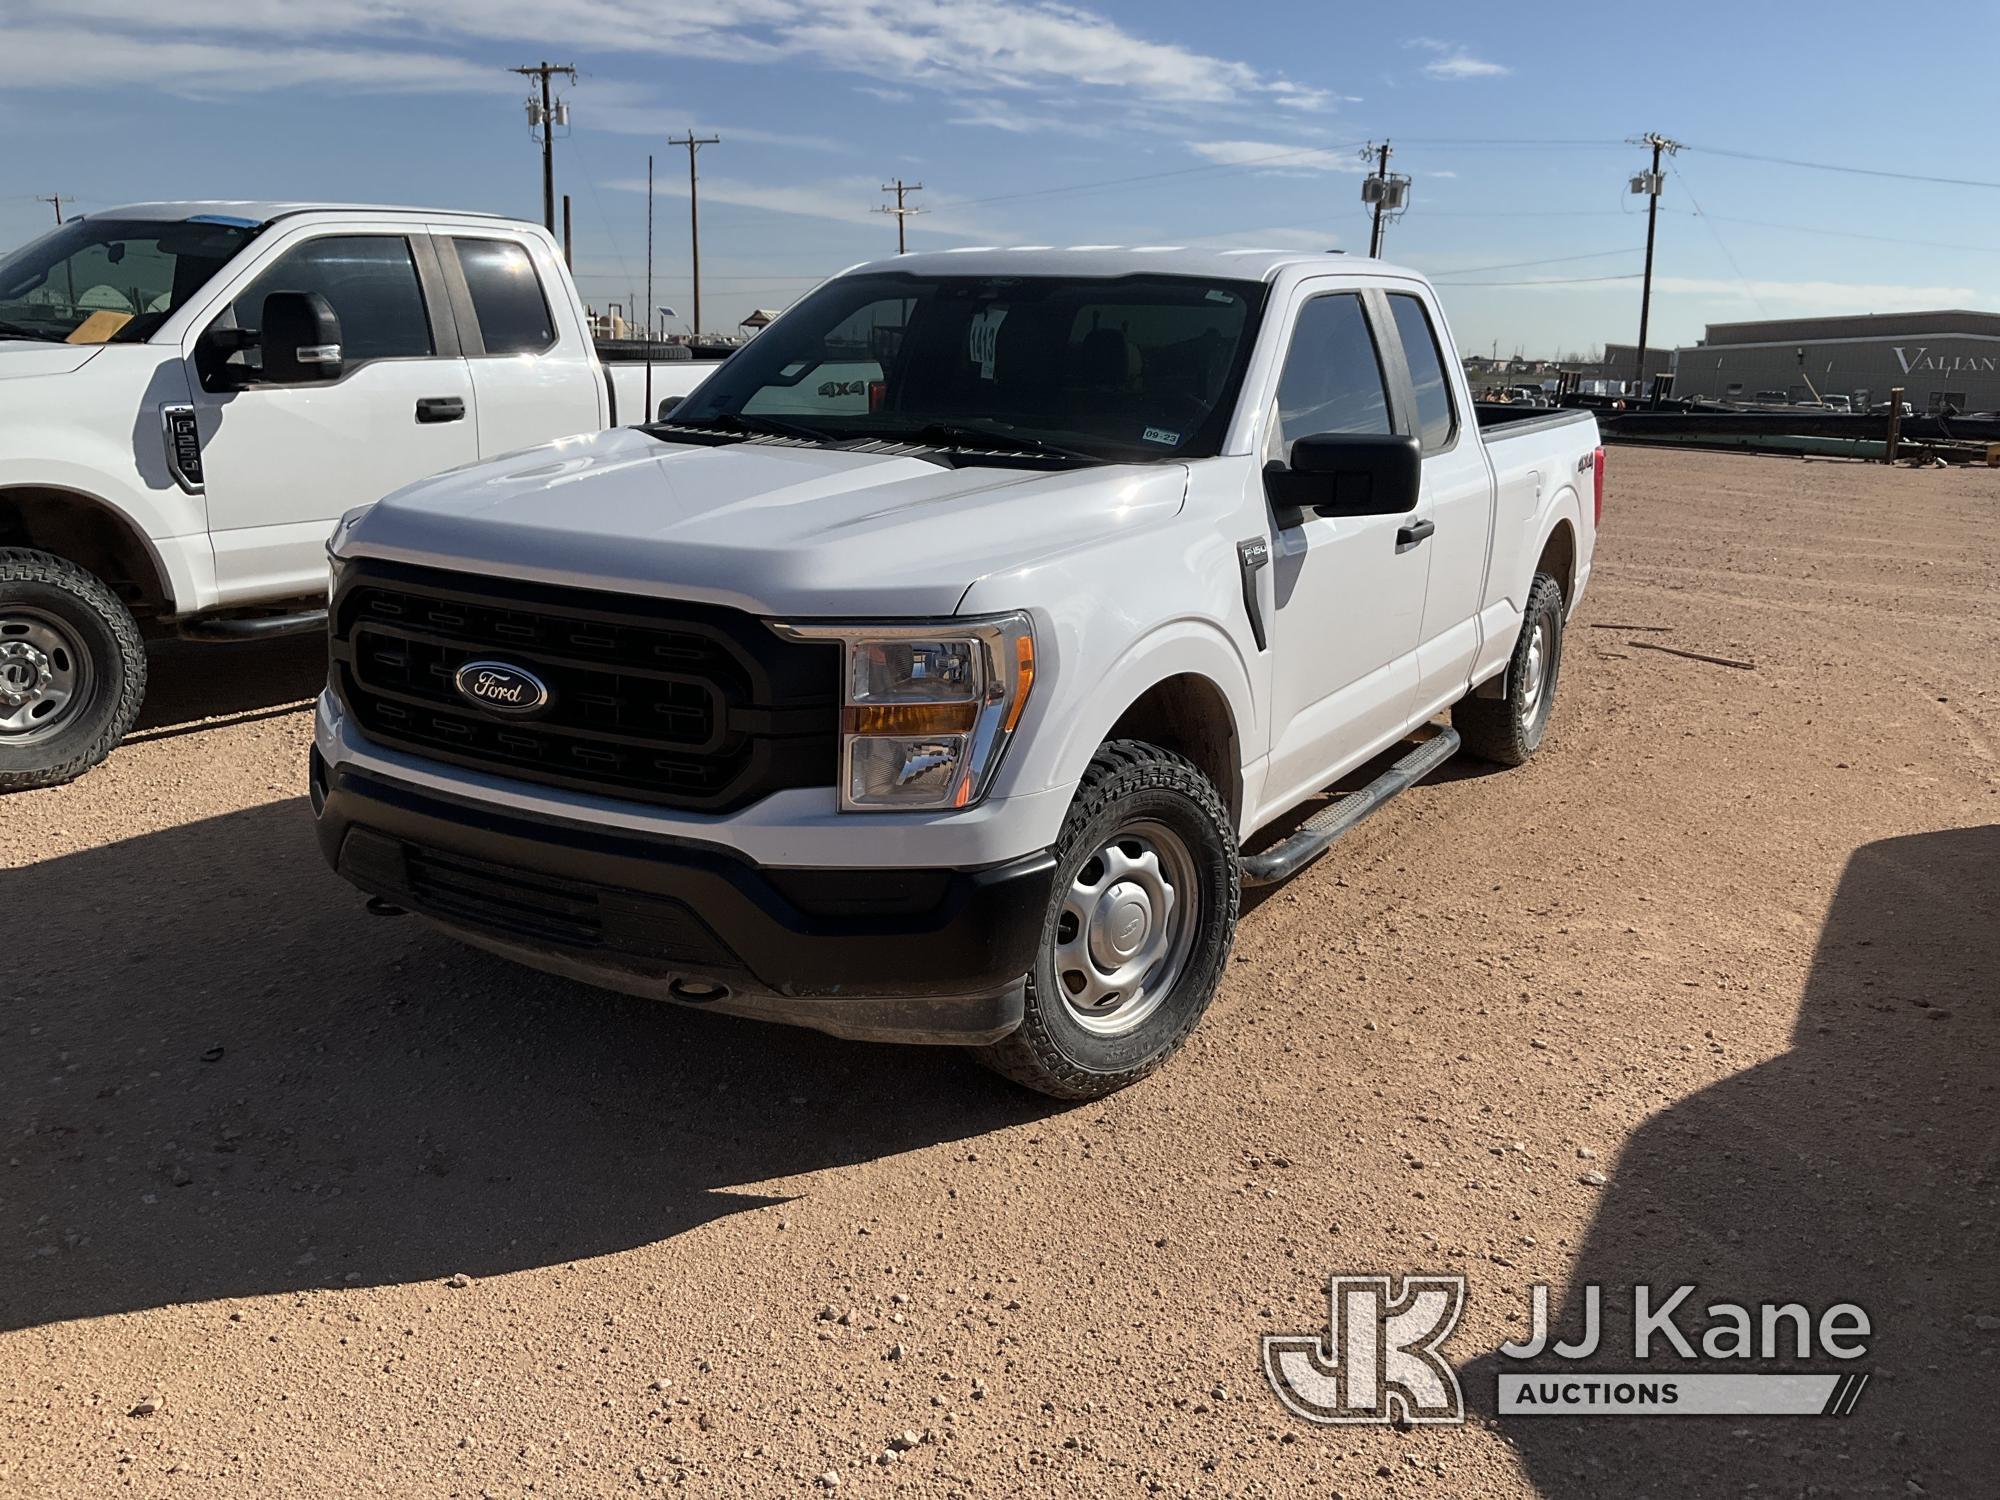 (Midland, TX) 2021 Ford F150 4x4 Extended-Cab Pickup Truck Starts, Runs and Moves) ( Per Seller, Fra